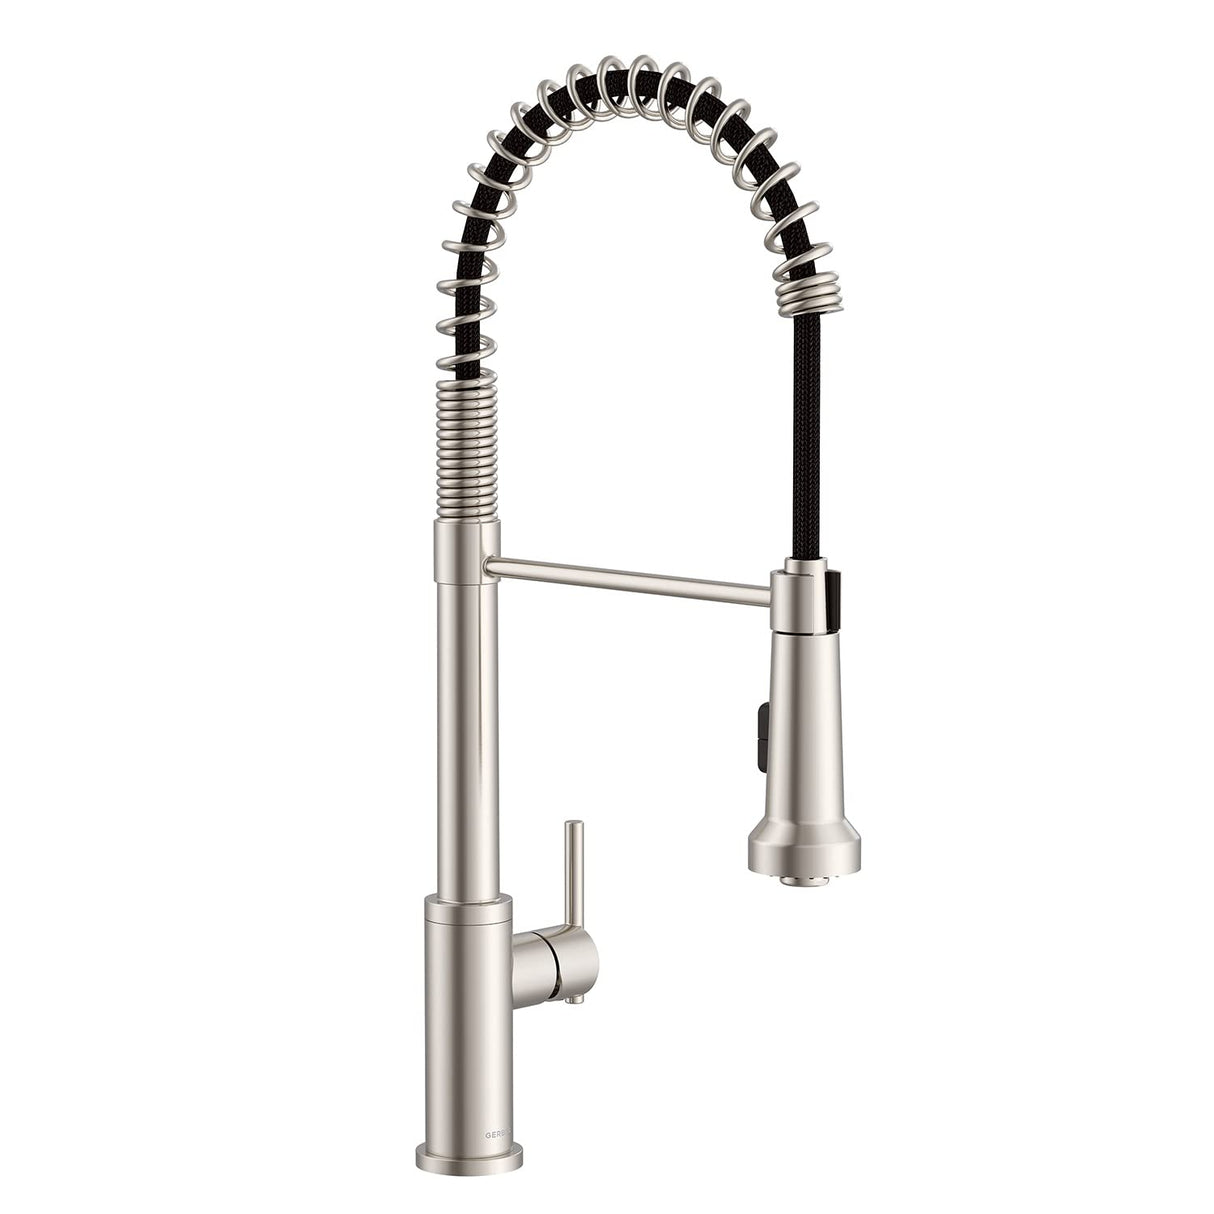 Gerber D454258SS Parma Pre-rinse Single Handle Spring Pull-down Kitchen Faucet - ...